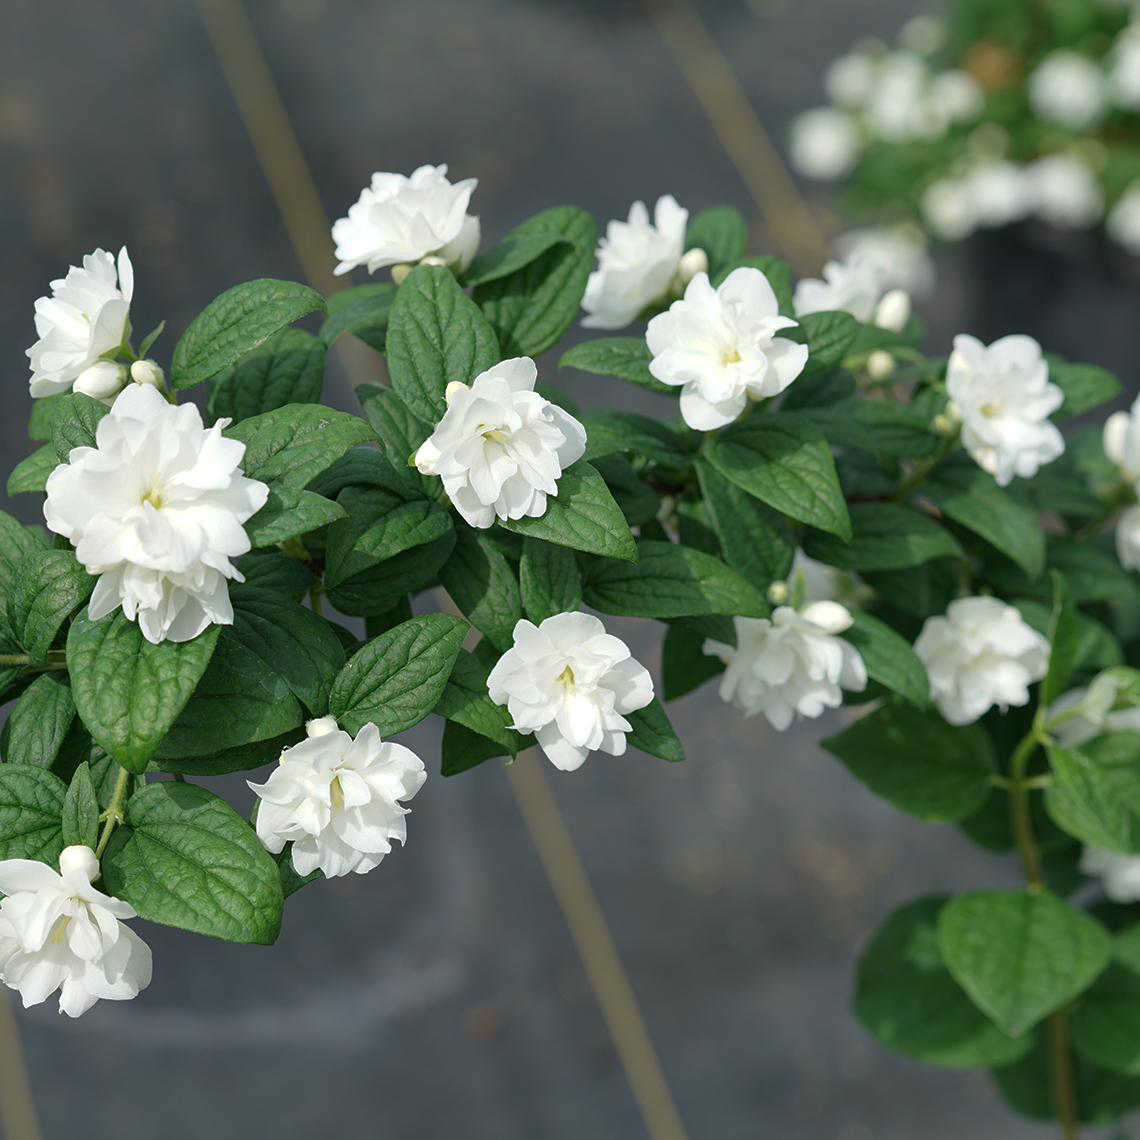 A closeup of a branch of Illuminati Arch mock orange showing its white flowers